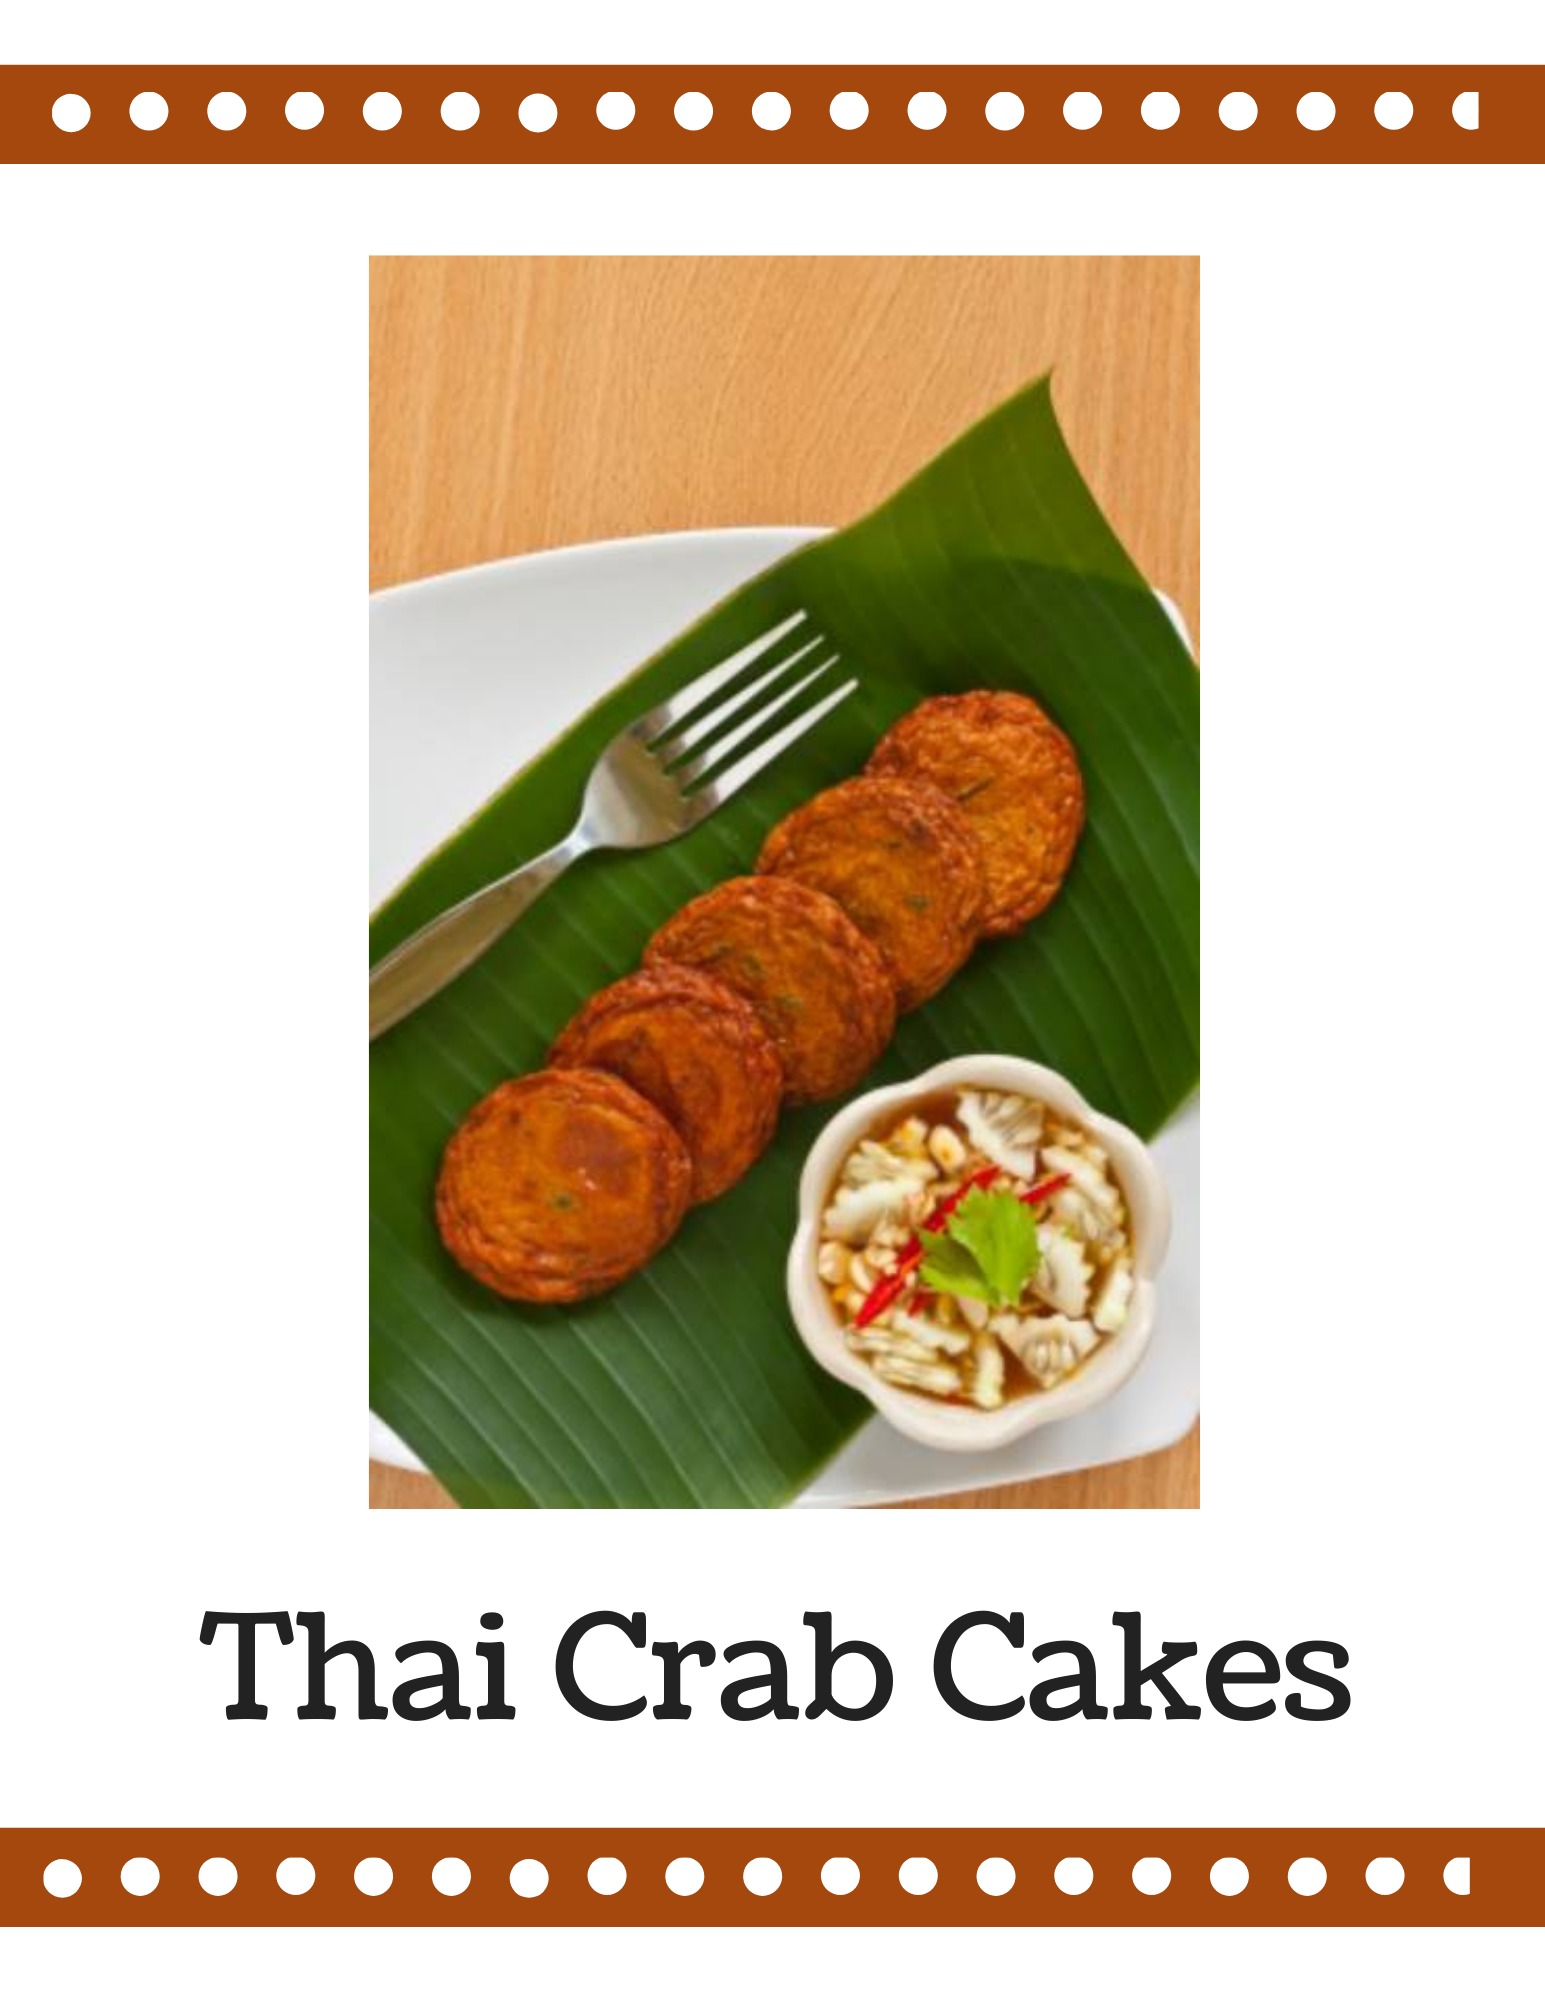 Aromatic Crab Cakes Recipe | How to Make the Best Easy ...